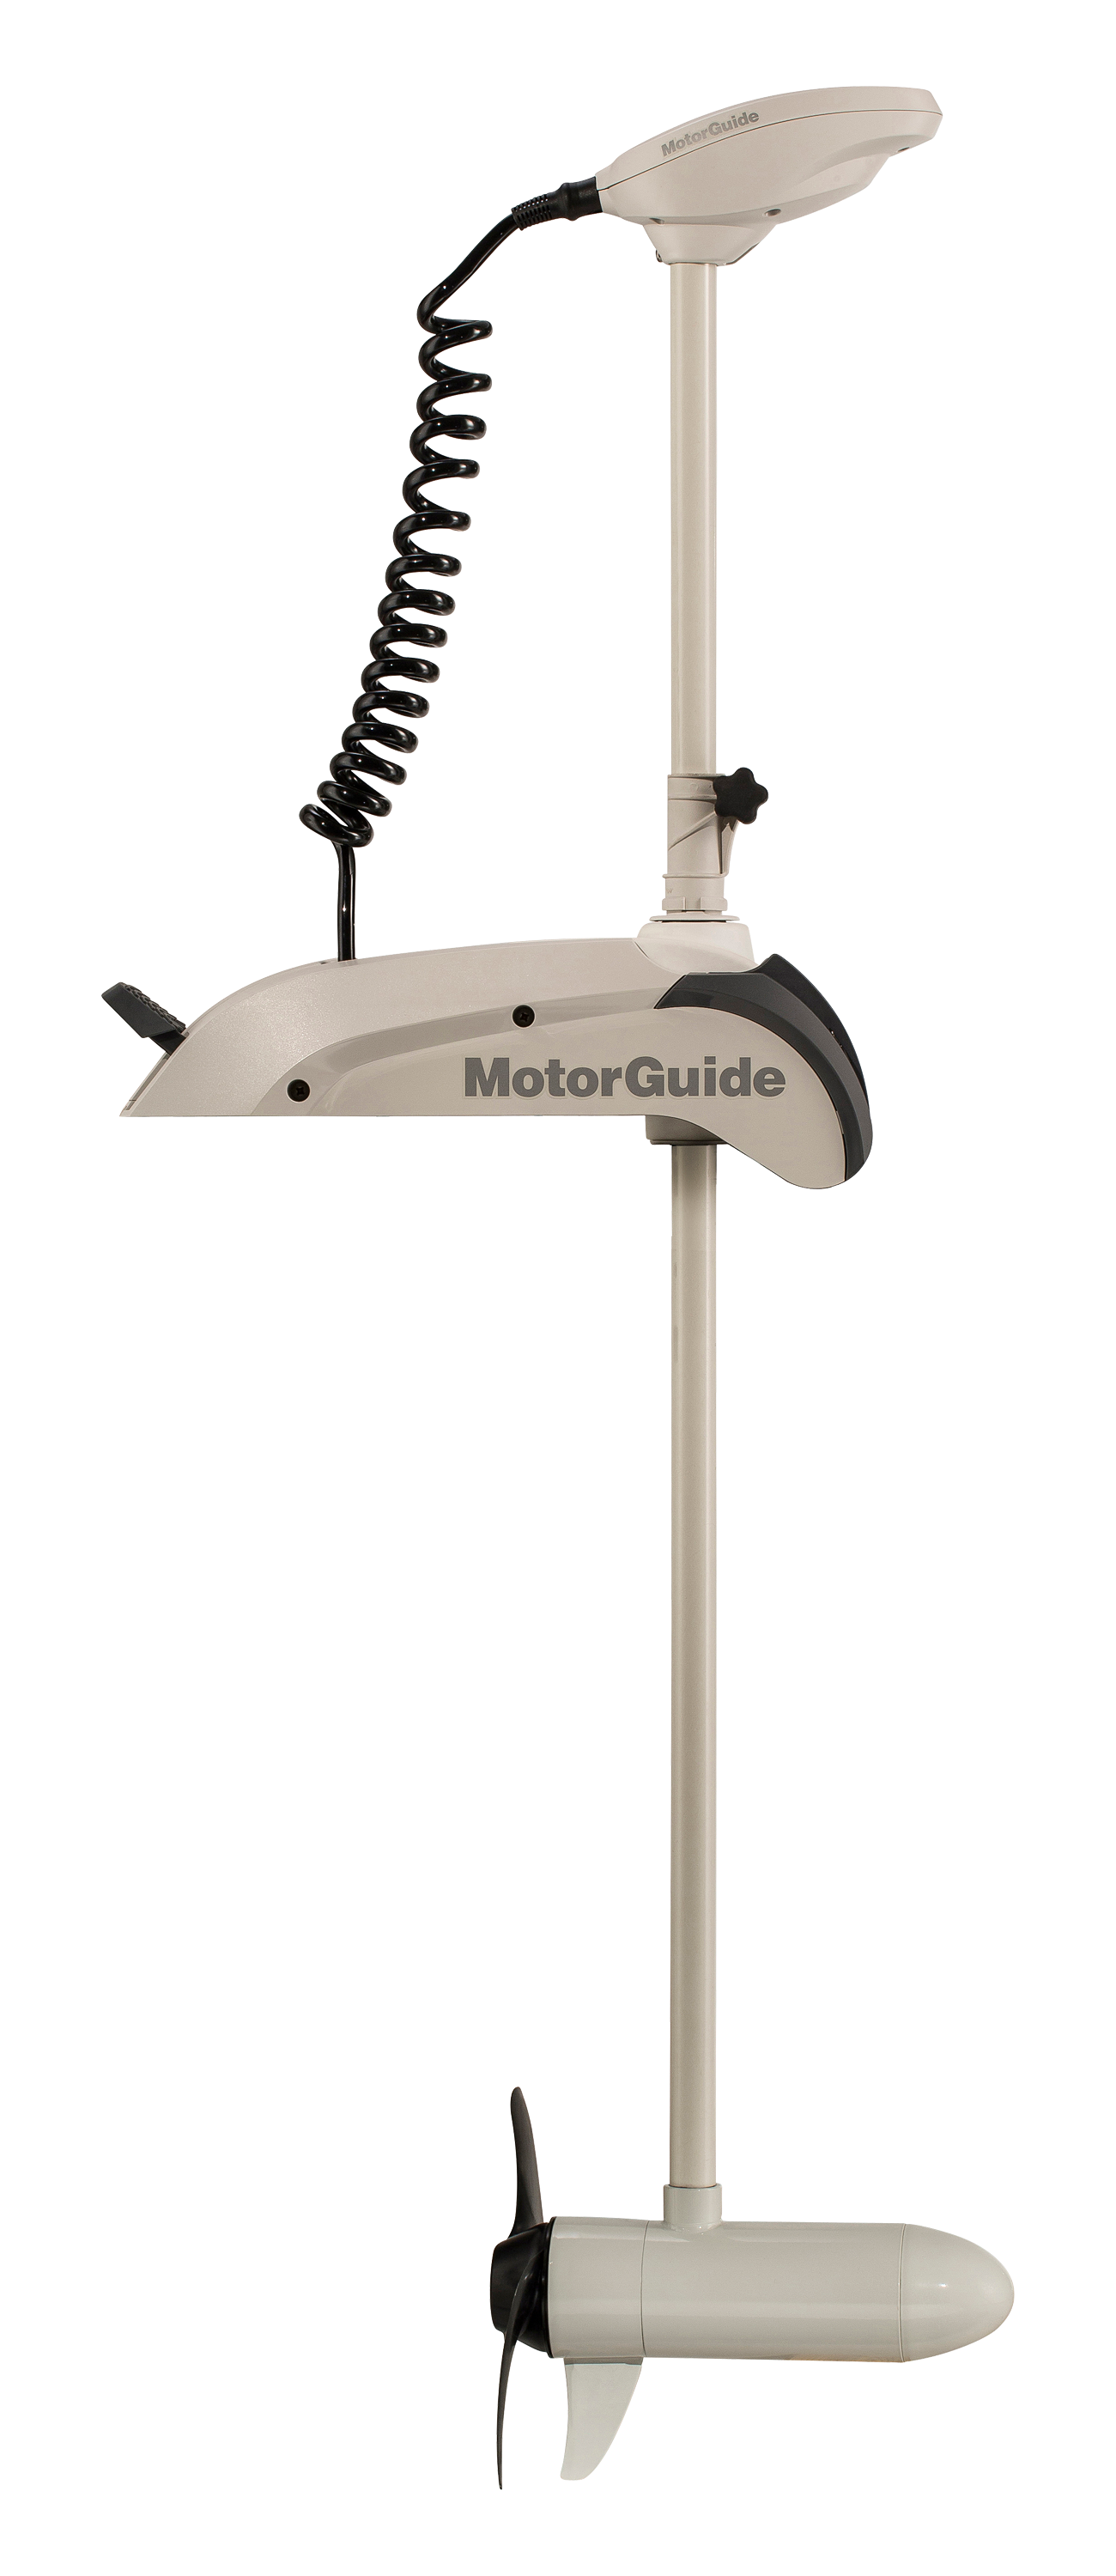 MotorGuide Xi5 Saltwater Trolling Motor with Pinpoint GPS